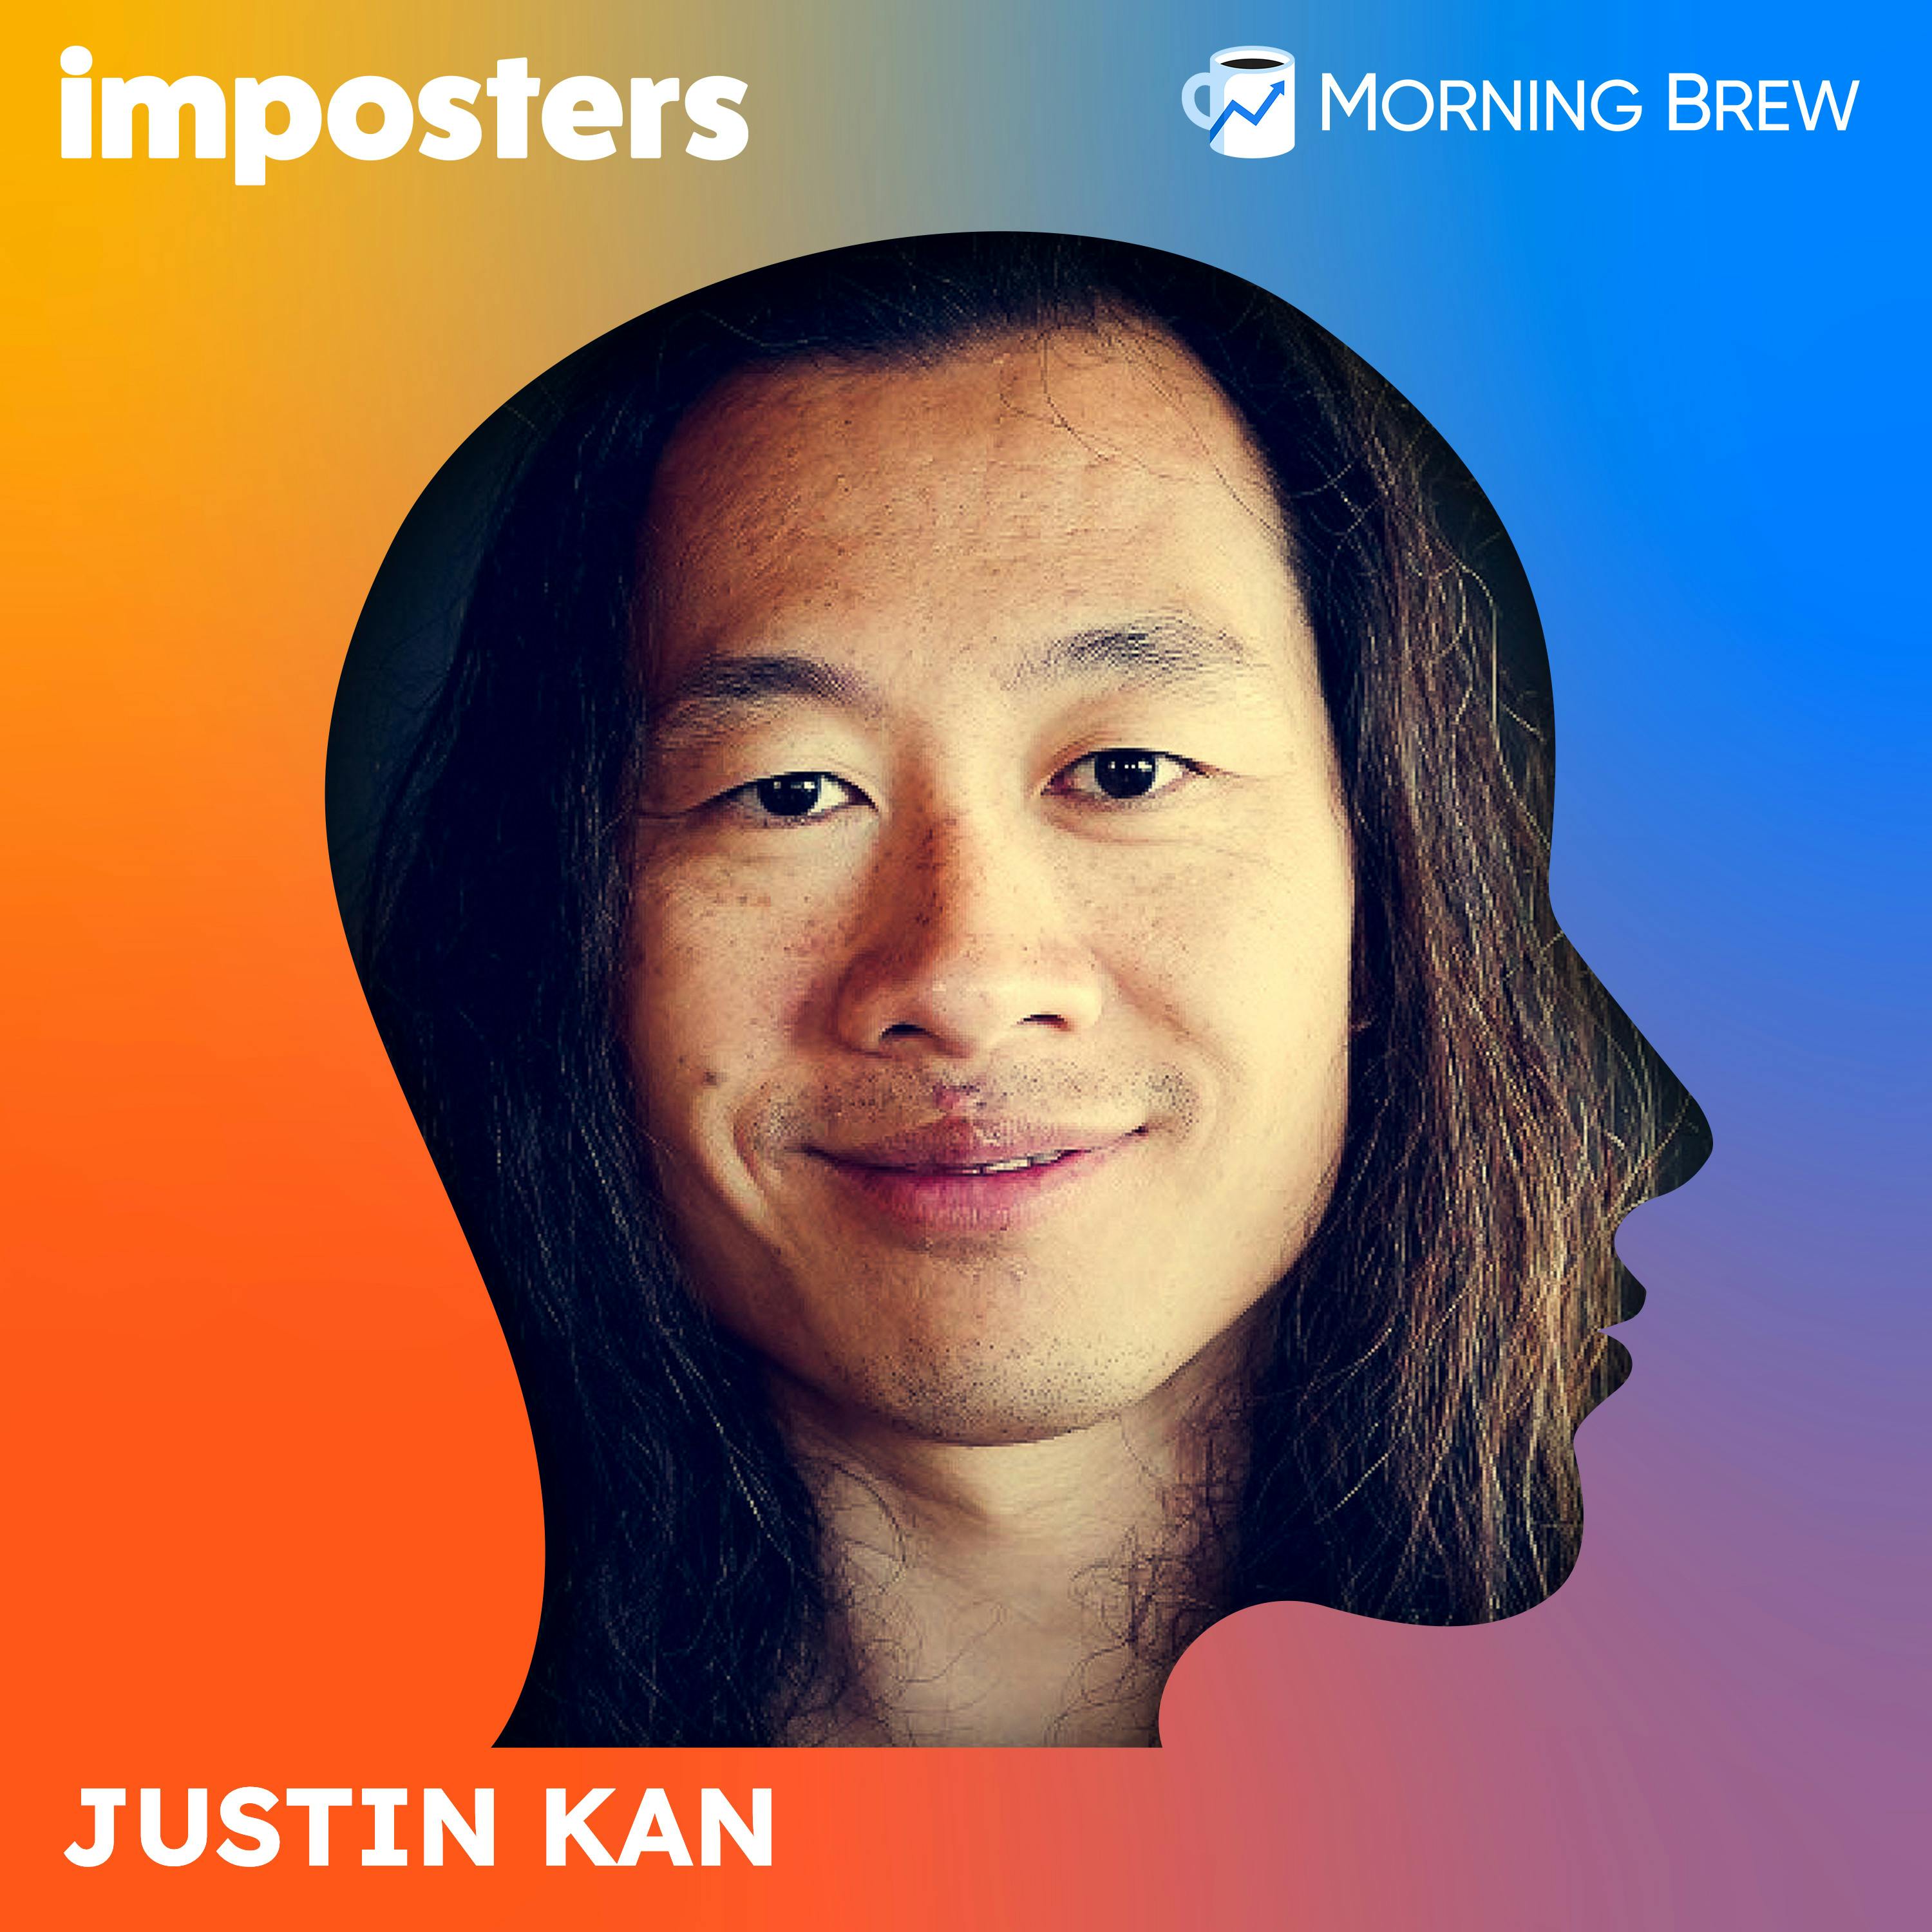 Bonus: "How Twitch Cofounder Justin Kan Got Sober" from Imposters Image